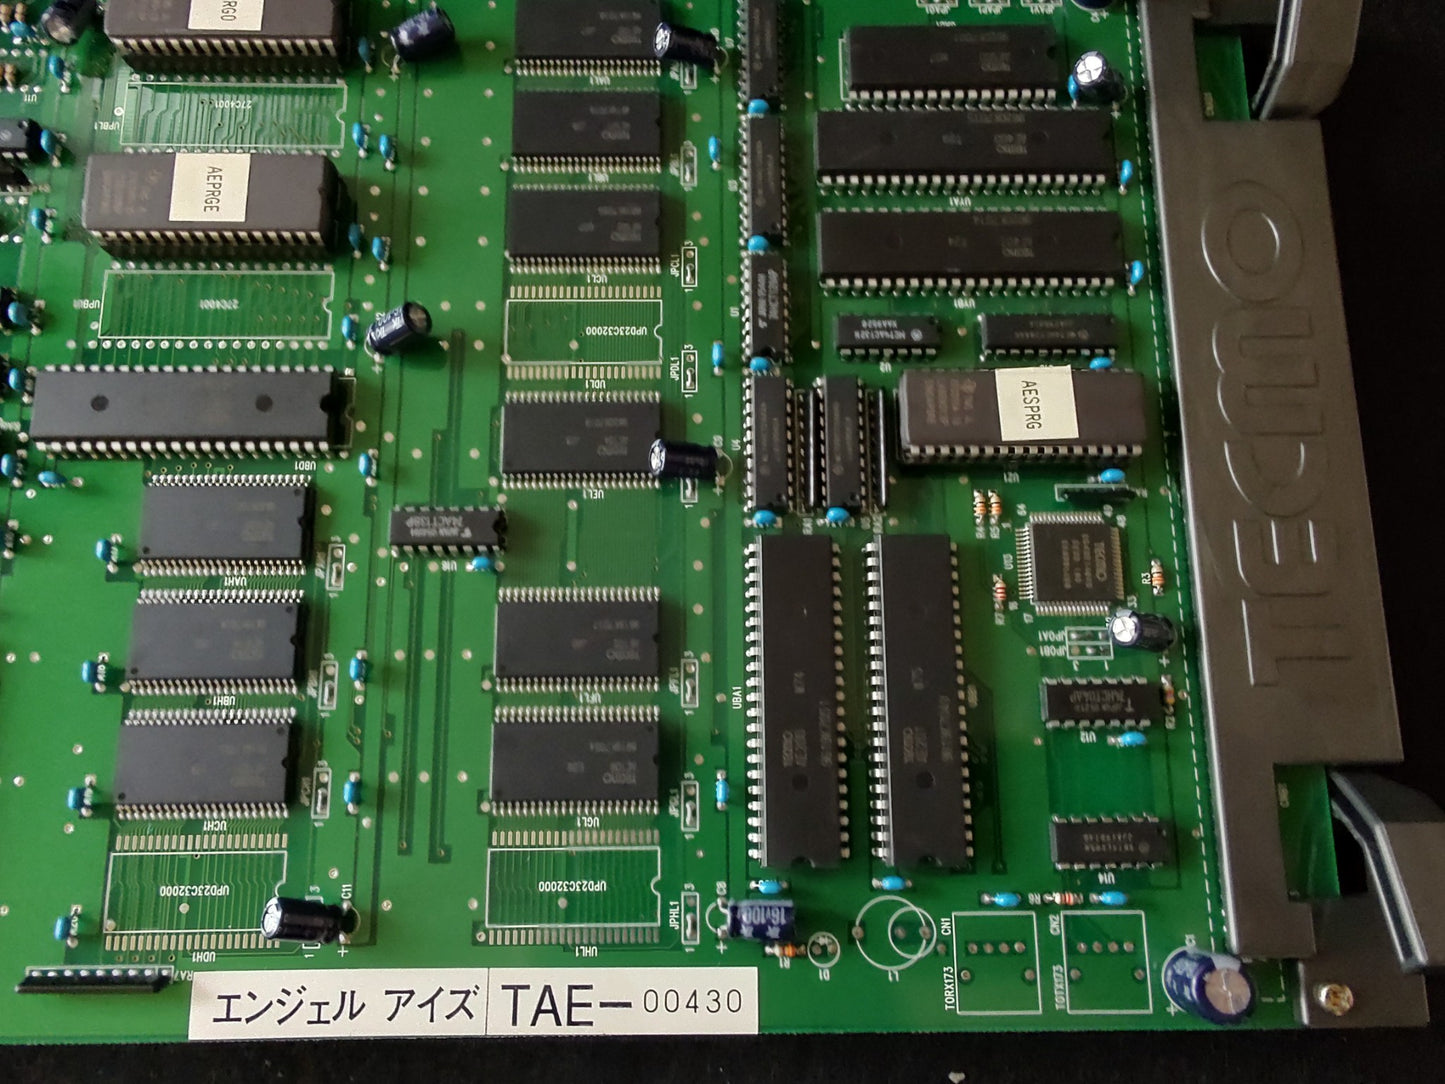 Touki Denshou Angel Eyes Arcade PCB System JAMMA Board and papers set-g0323-